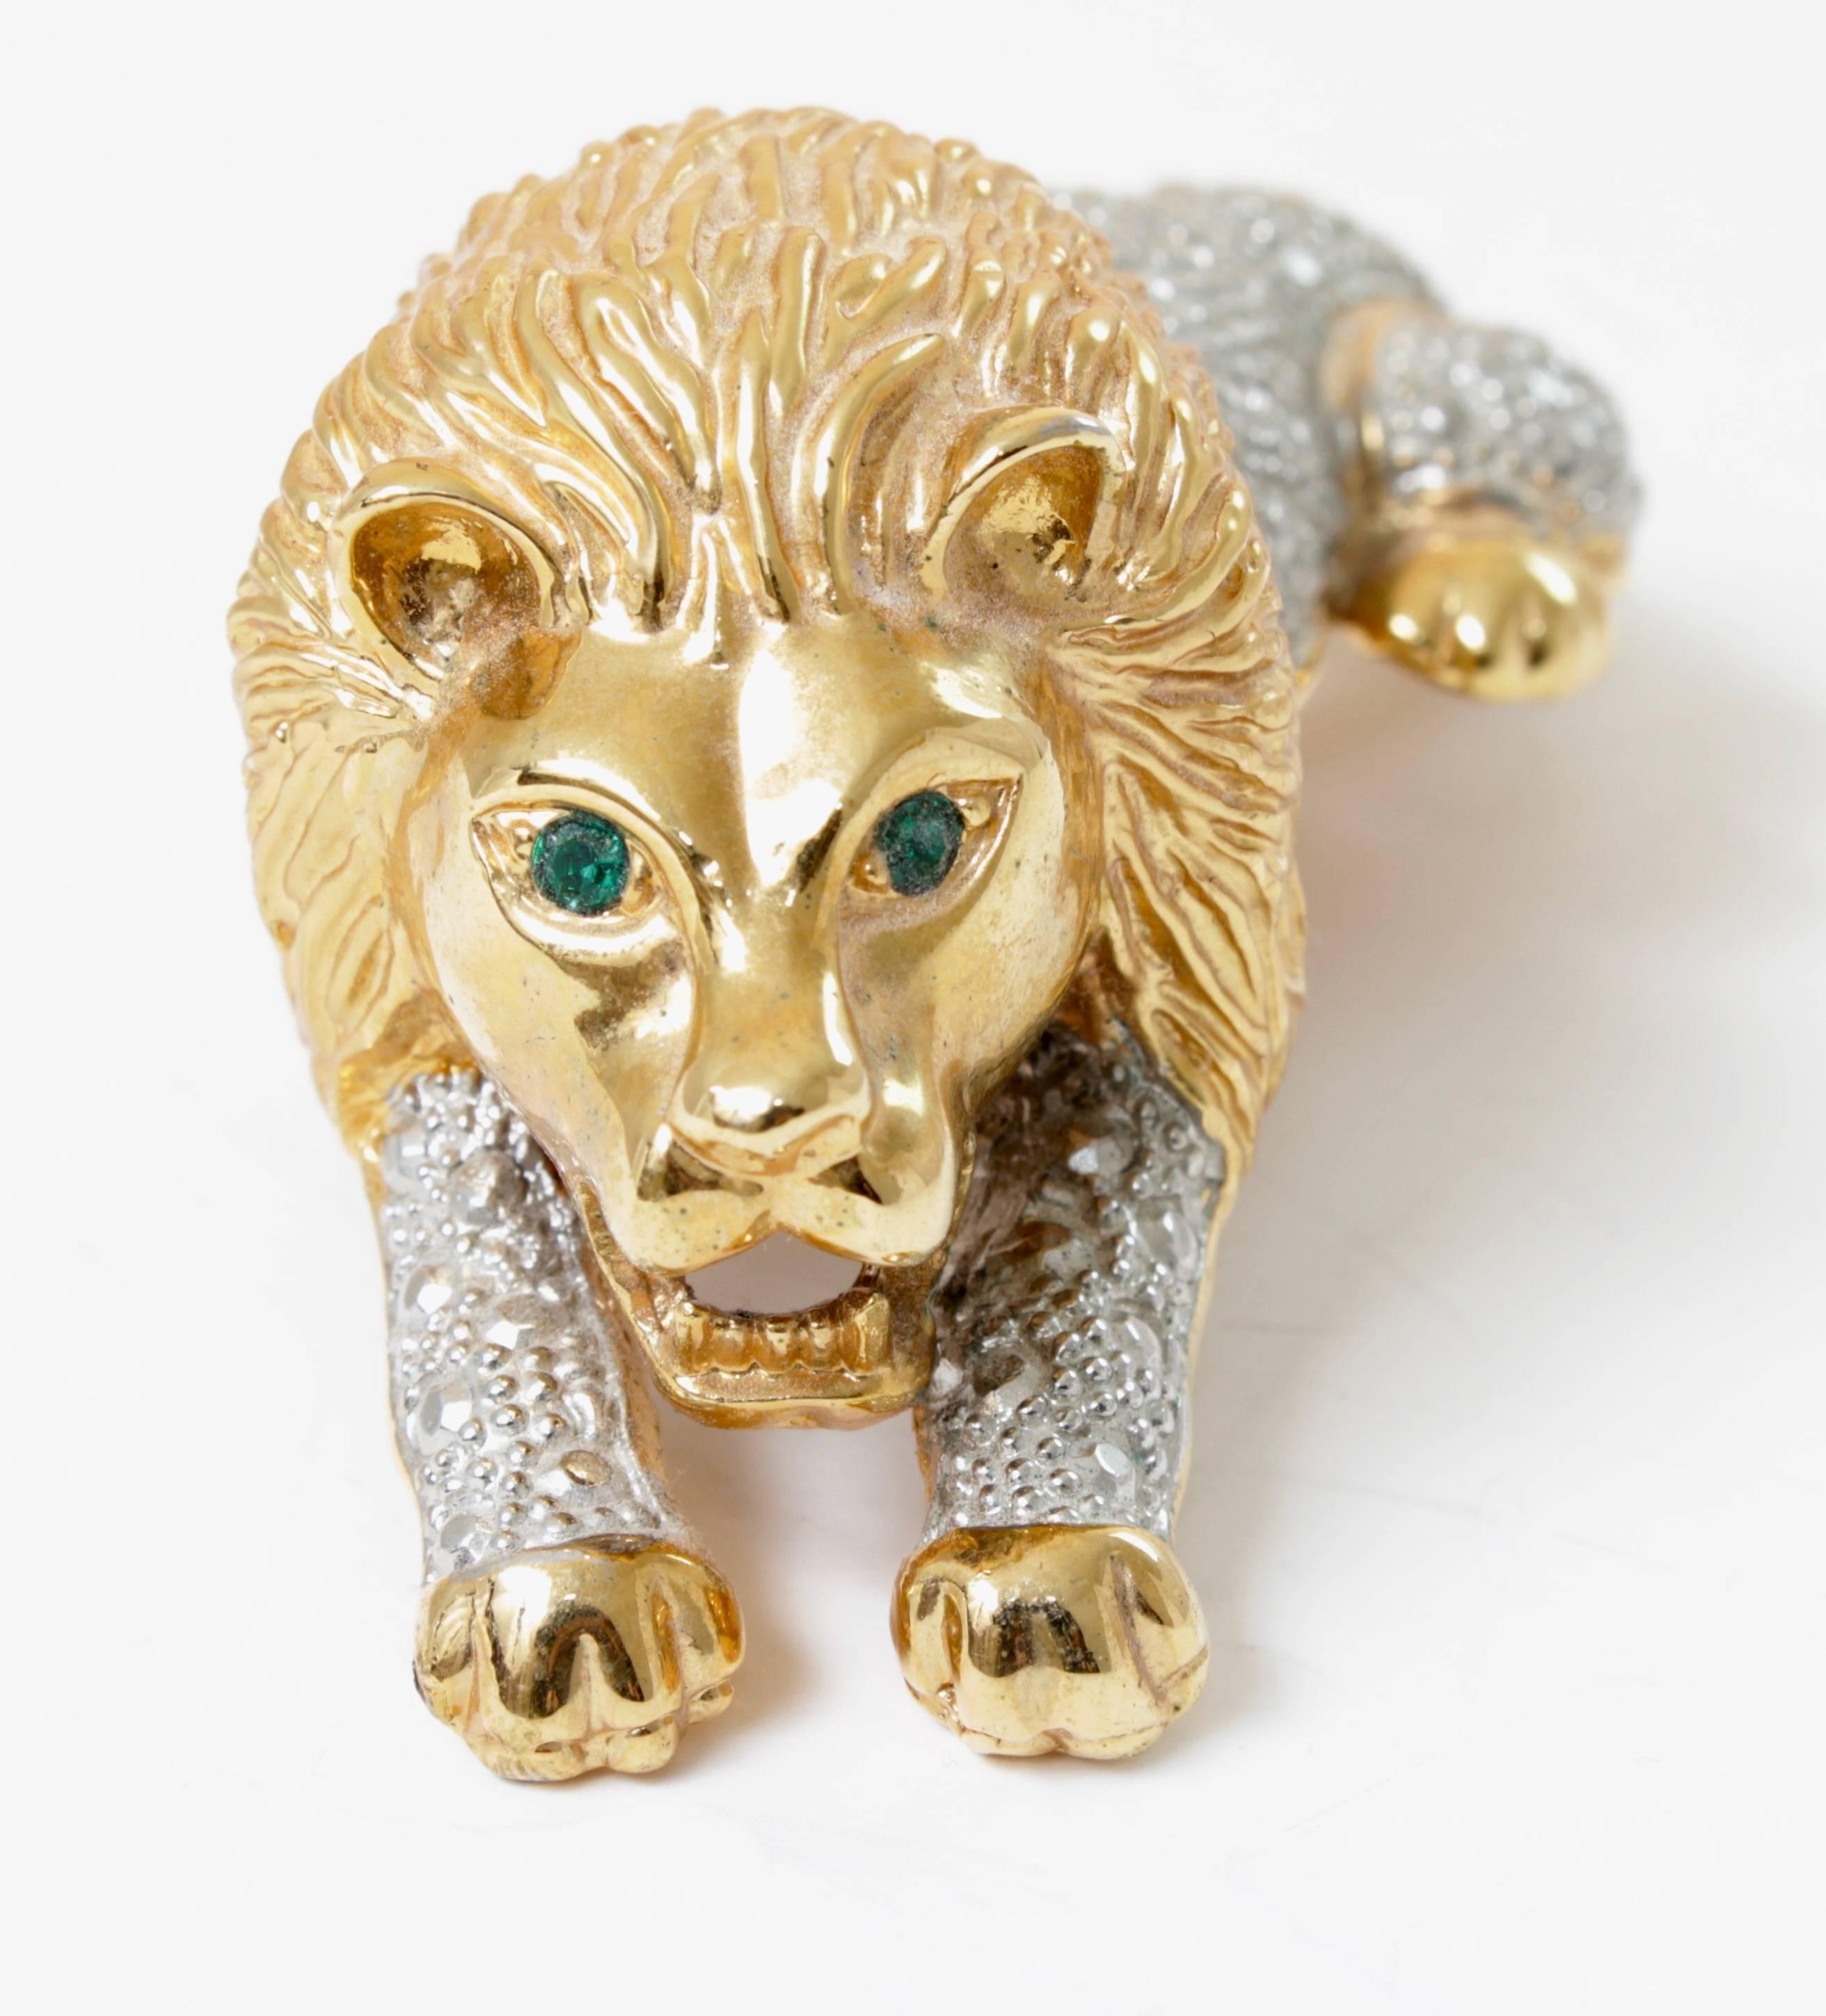 This roaring lion brooch or shoulder pin measures 4.2 in long and features striking emerald green cabochon eyes, very much in the style of Hattie Carnegie.  It measures 4.2in L by 2in W and is unsigned.  In very good vintage condition, we note some